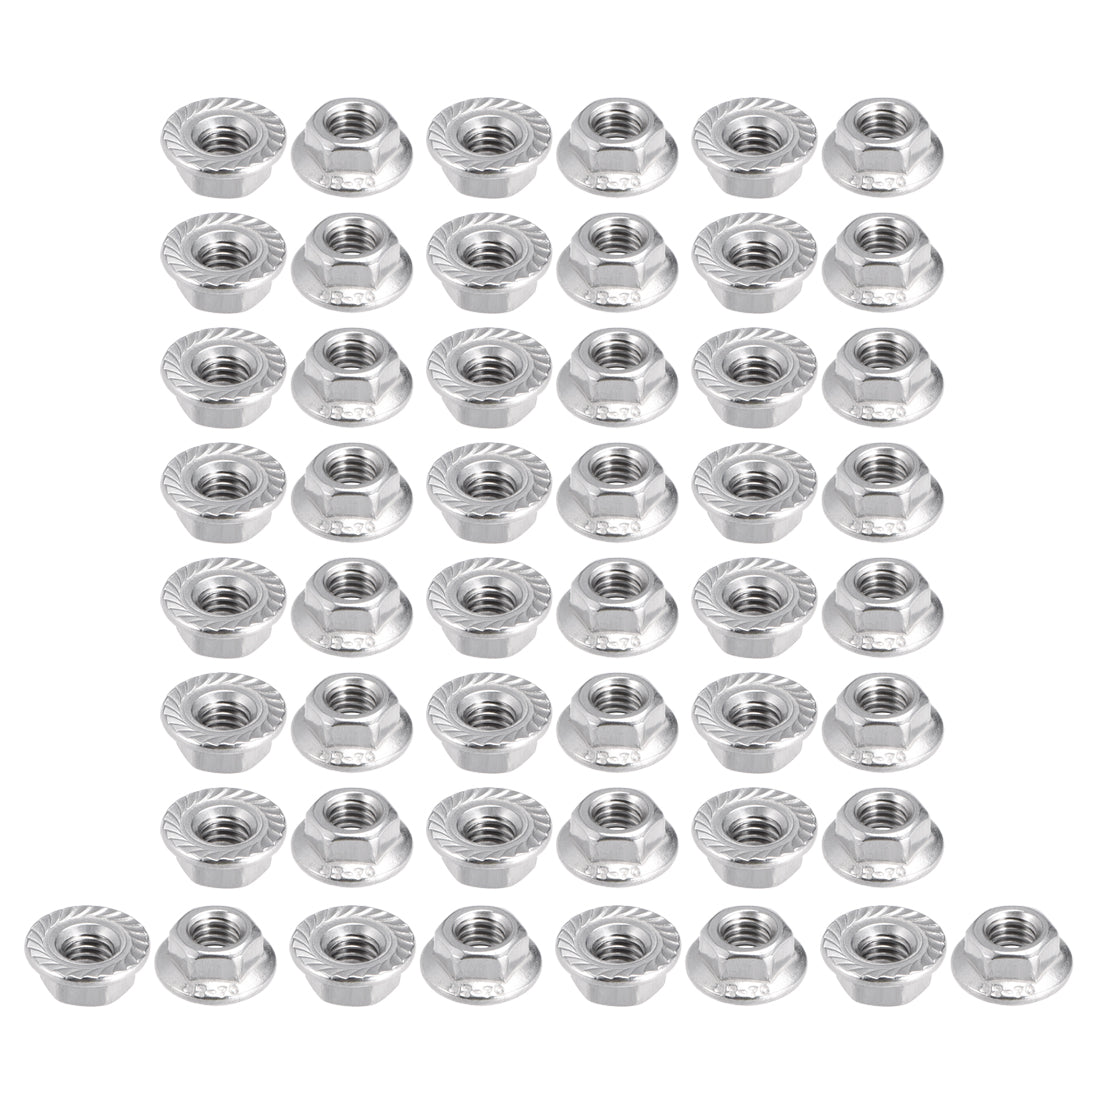 Uxcell Uxcell M3 Serrated Flange Hex Lock Nuts, 304 Stainless Steel, 50 Pcs